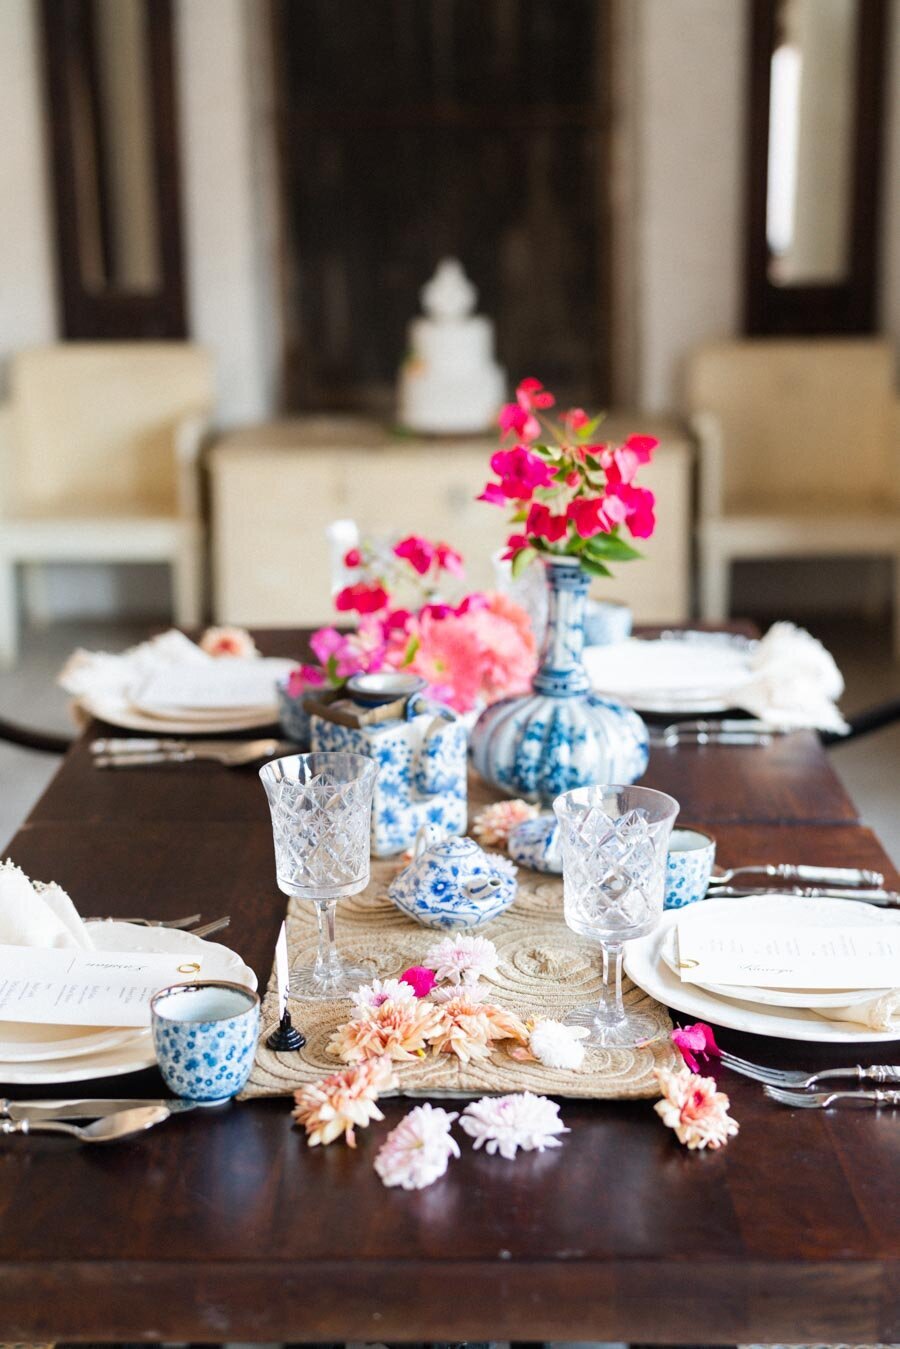 Blue and White Vase Wedding Centerpiece with Pink Flowers Indian Elopement Bonnie Sen Photography